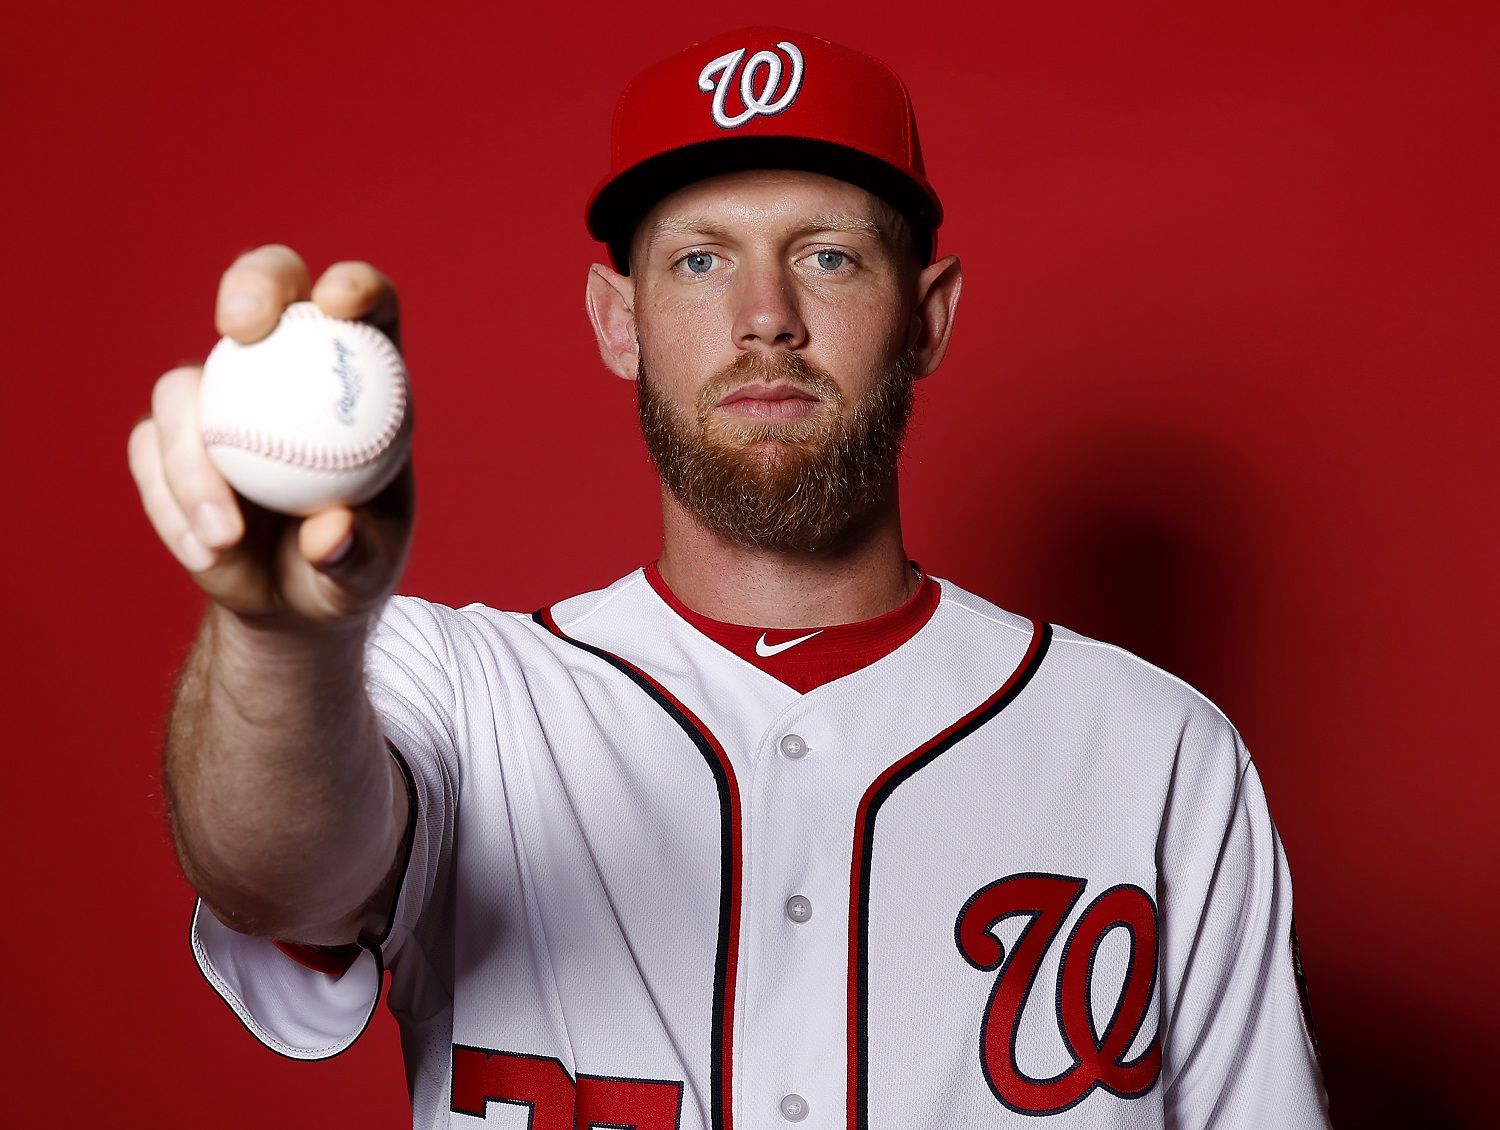 WEST PALM BEACH, FLORIDA - FEBRUARY 22:  Stephen Strasburg #37 of the Washington Nationals poses for a portrait on Photo Day at FITTEAM Ballpark of The Palm Beaches during on February 22, 2019 in West Palm Beach, Florida. (Photo by Michael Reaves/Getty Images)